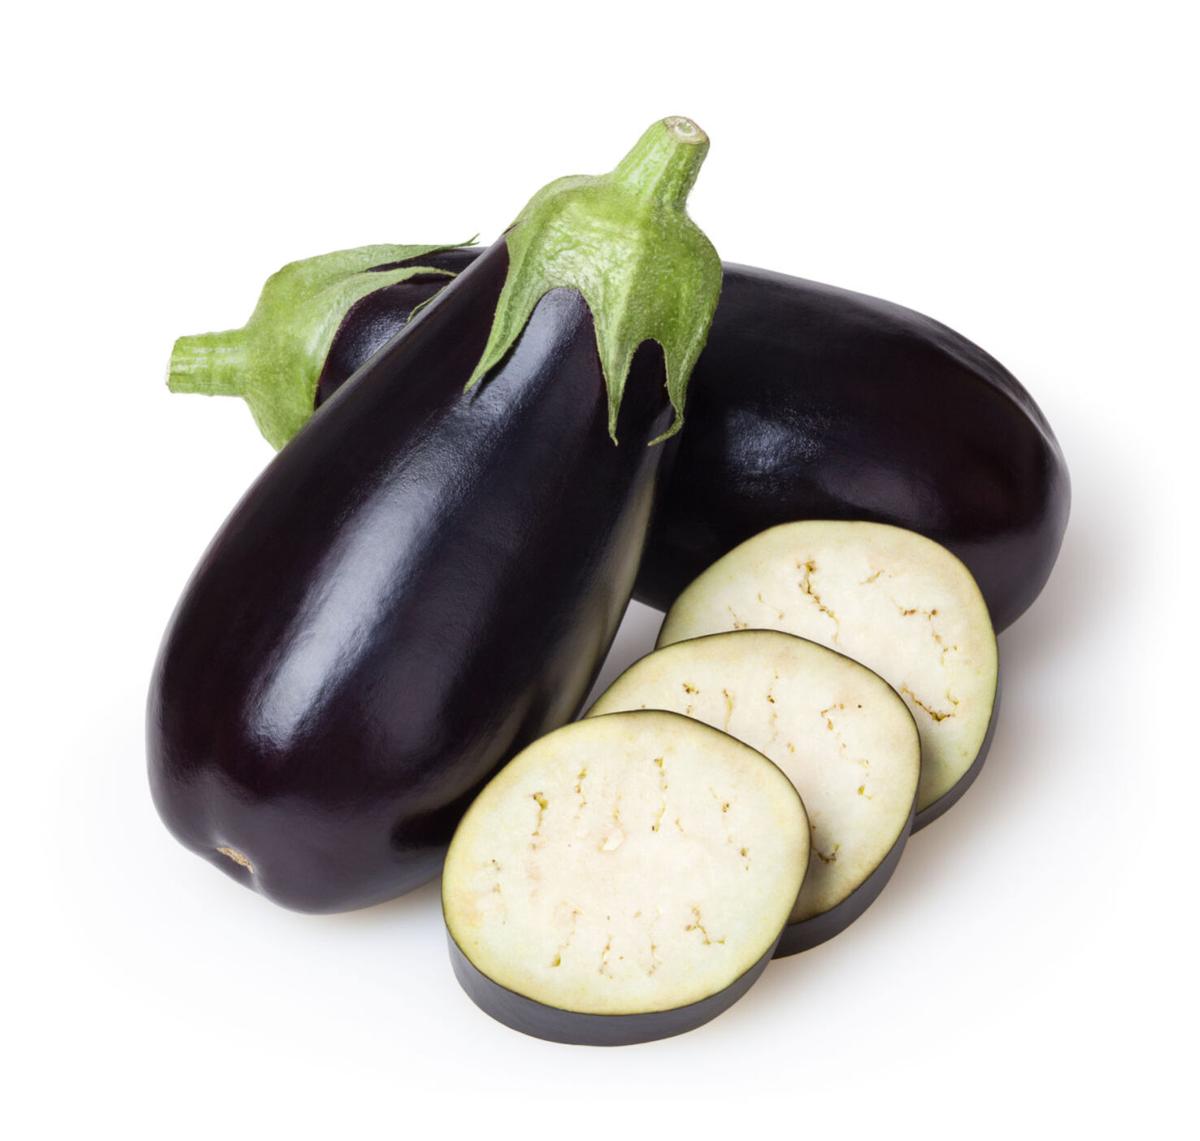 Don't fear the eggplant. It's not as intimidating as you might think ...